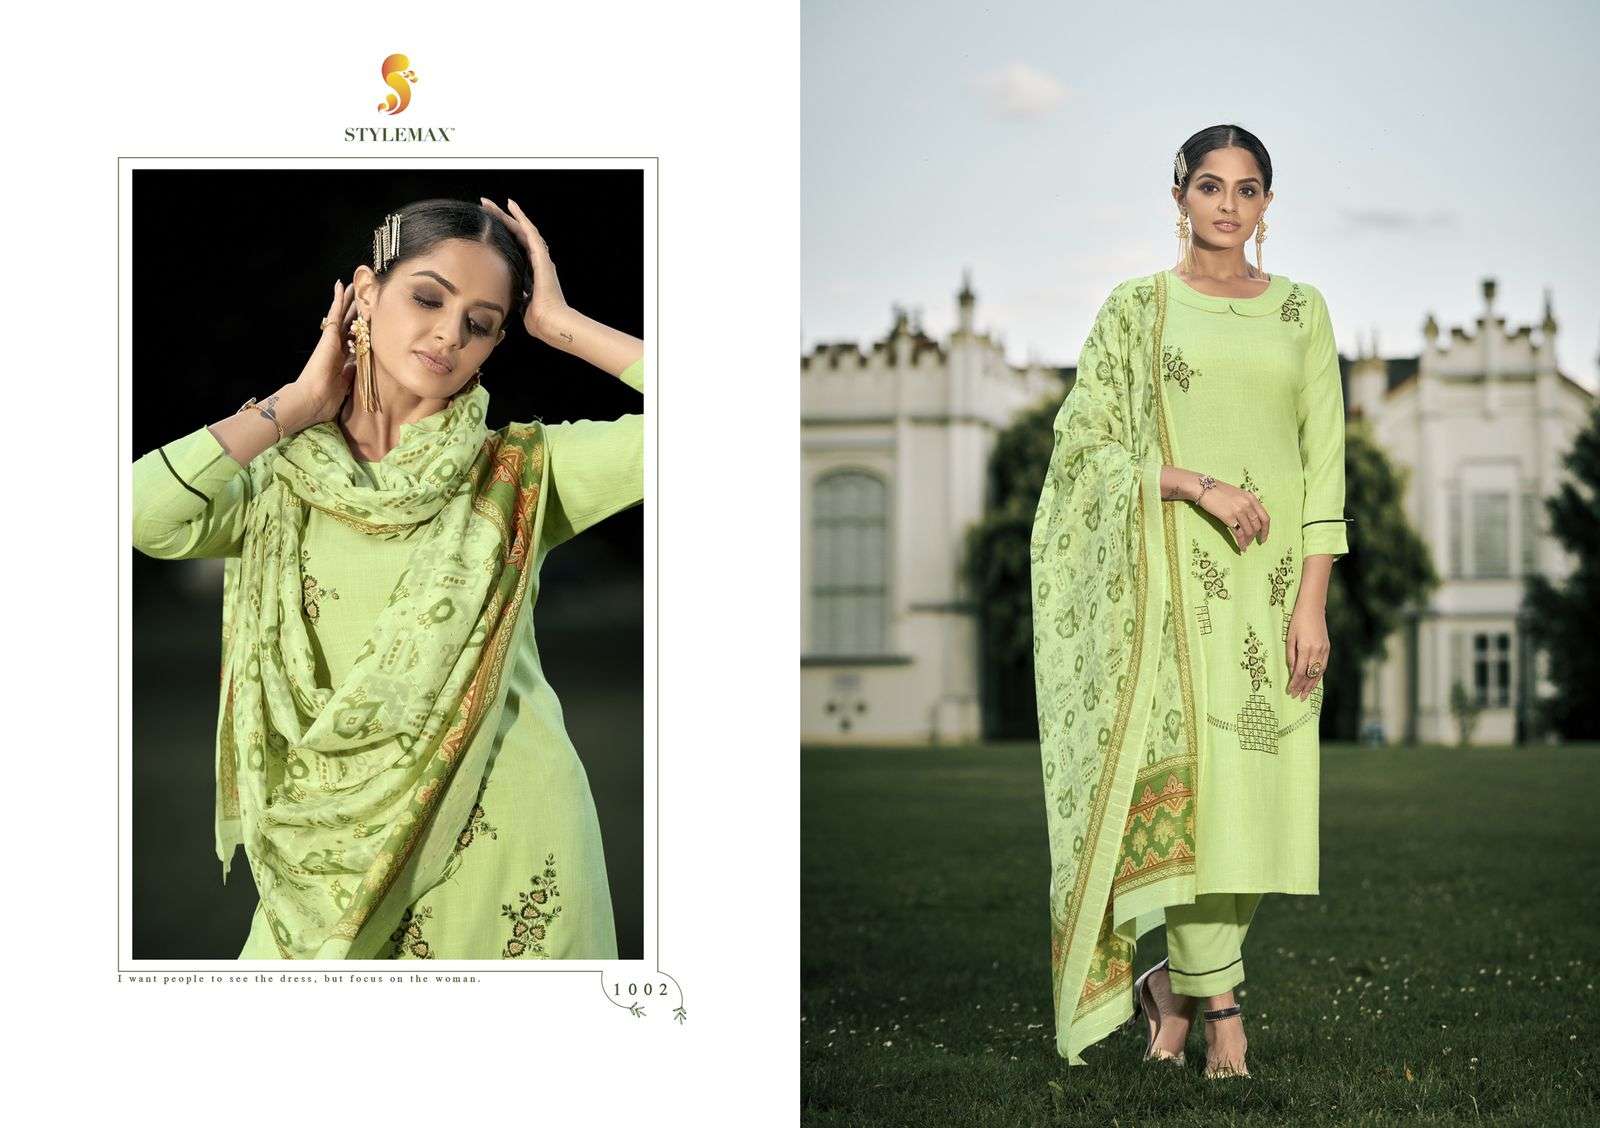 SAJNI BY STYLEMAX 1001 TO 1004 SERIES BEAUTIFUL SUITS COLORFUL STYLISH FANCY CASUAL WEAR & ETHNIC WEAR PURE COTTON SLUB EMBROIDERED DRESSES AT WHOLESALE PRICE